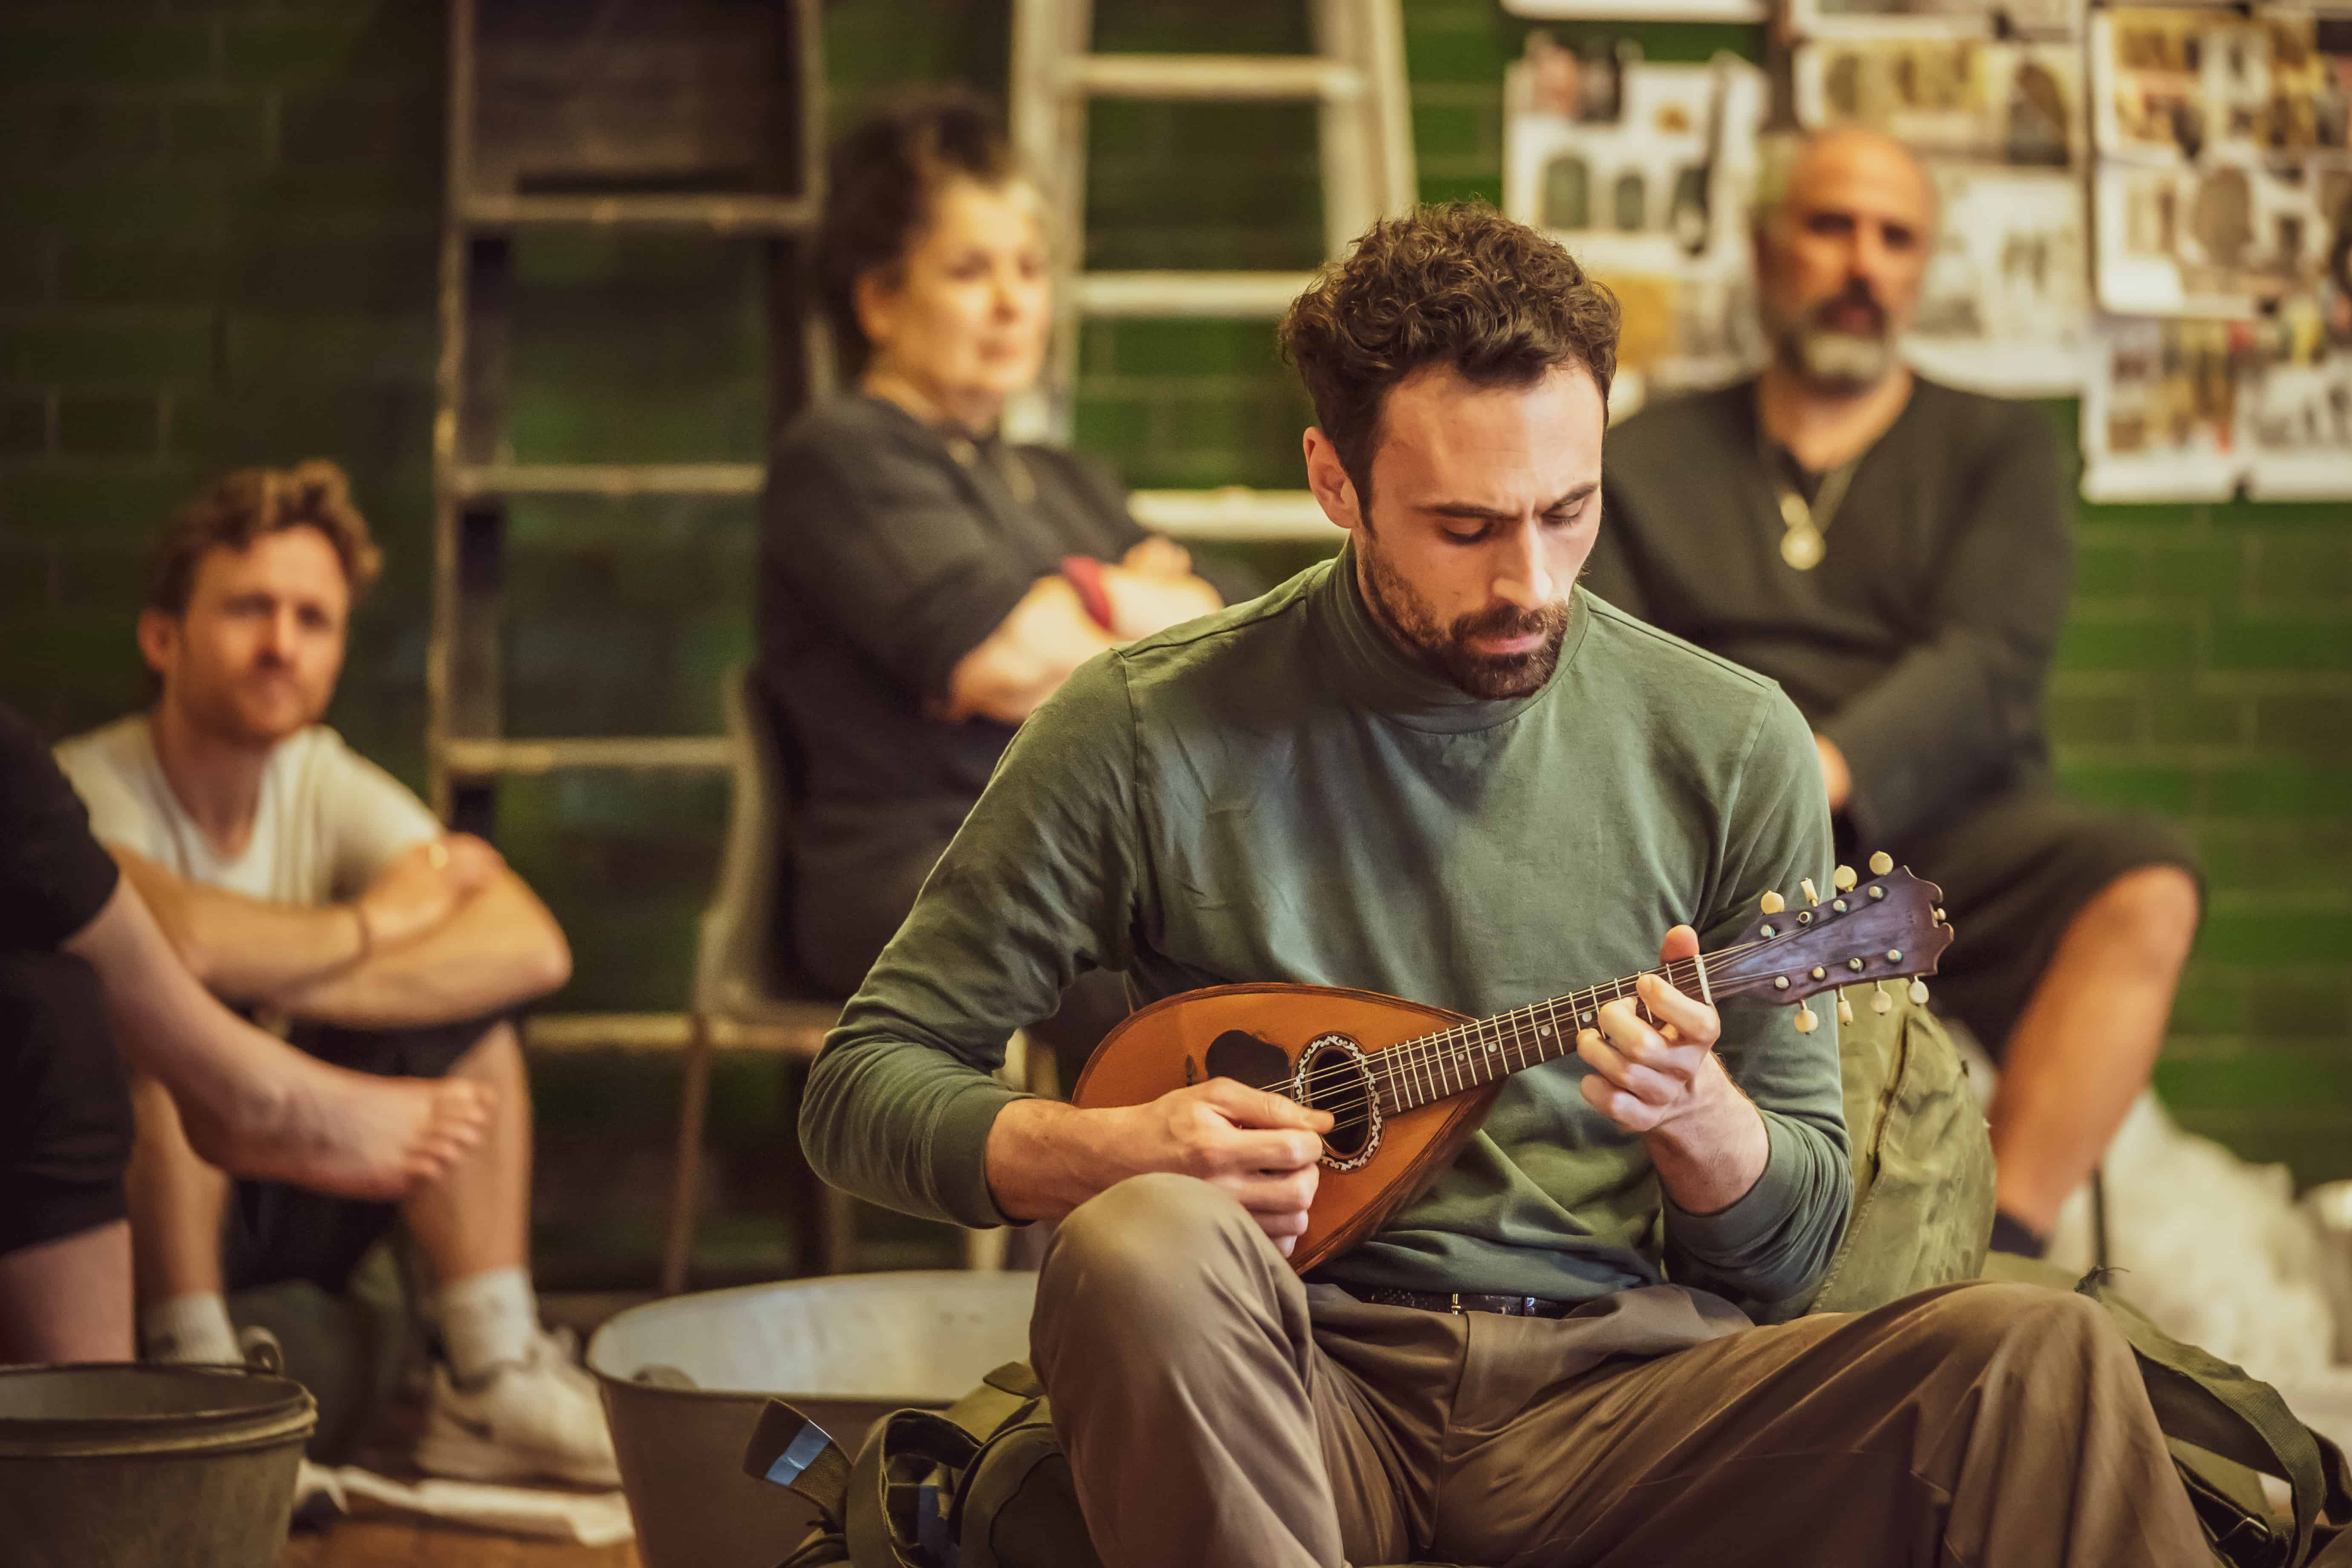 Alex Mugnaioni in rehearsals for Captain Corelli's Mandolin with the missing instrument. Credit Marc Brenner